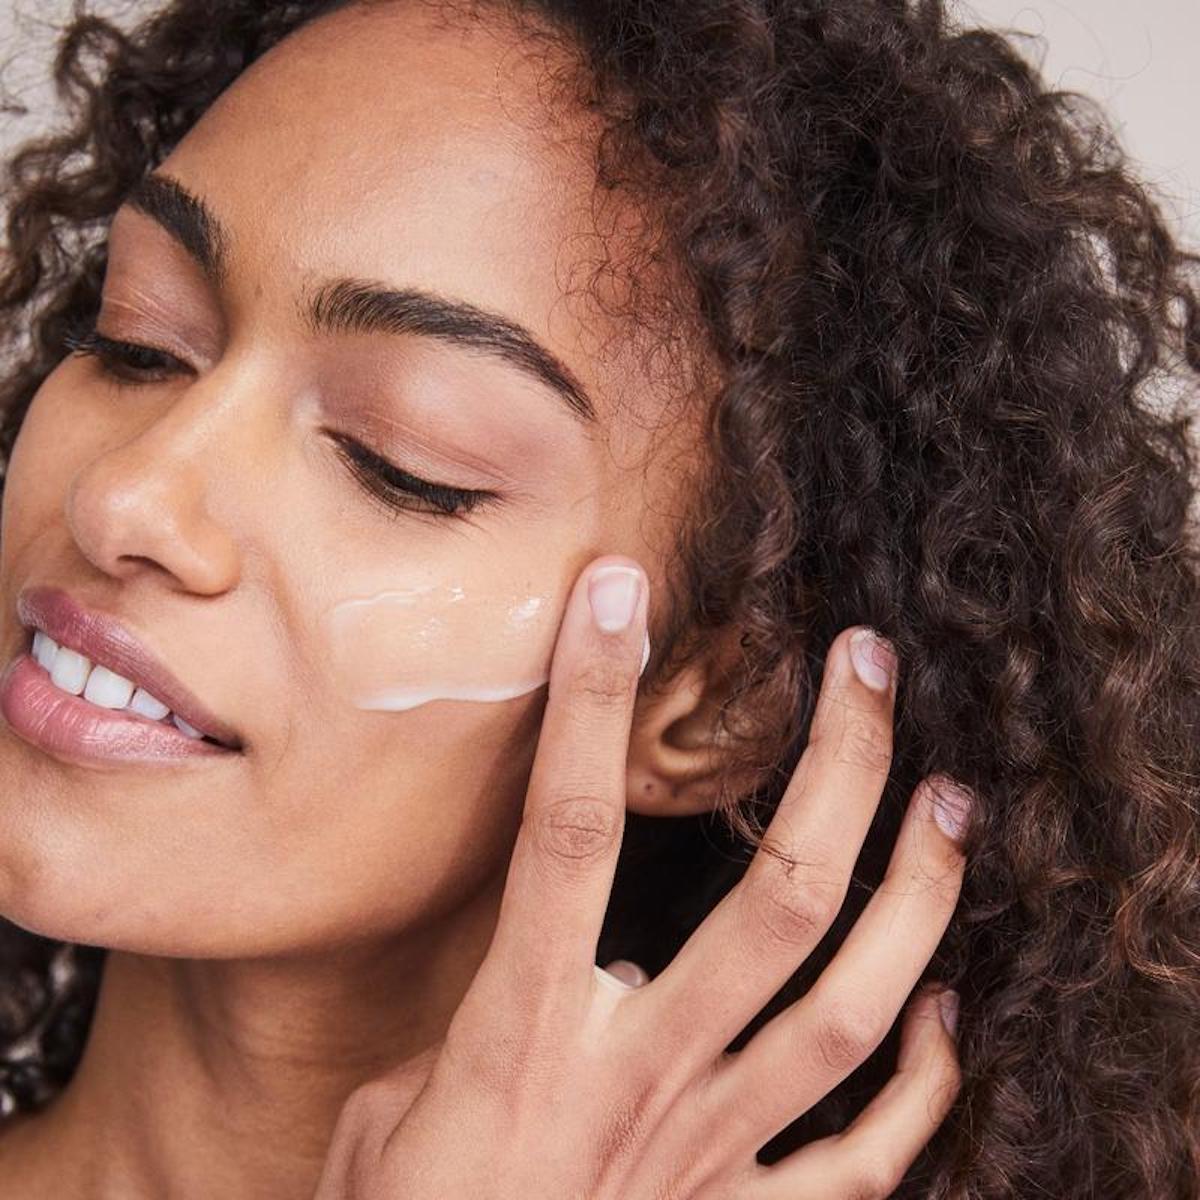 21 Amazing Finds For Curating The Best Skincare Routine